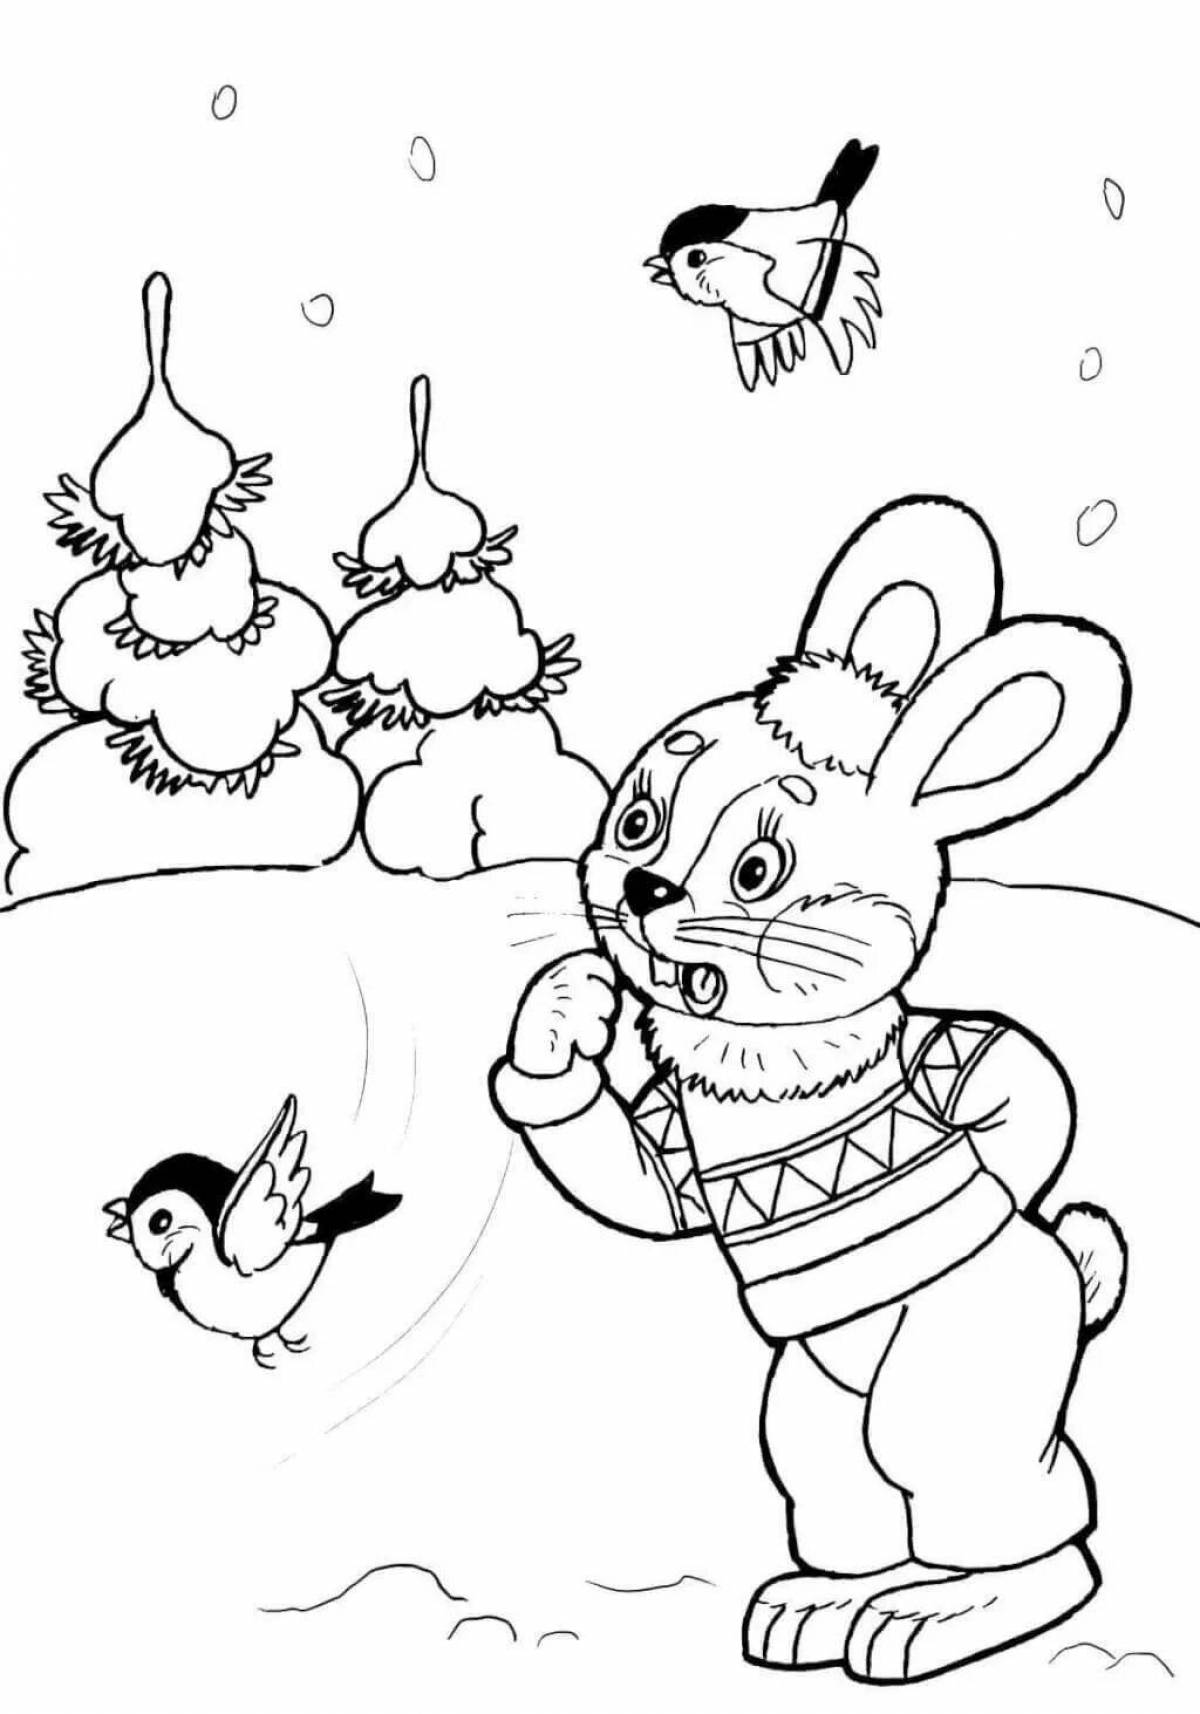 Adorable winter animals coloring book for 3-4 year olds